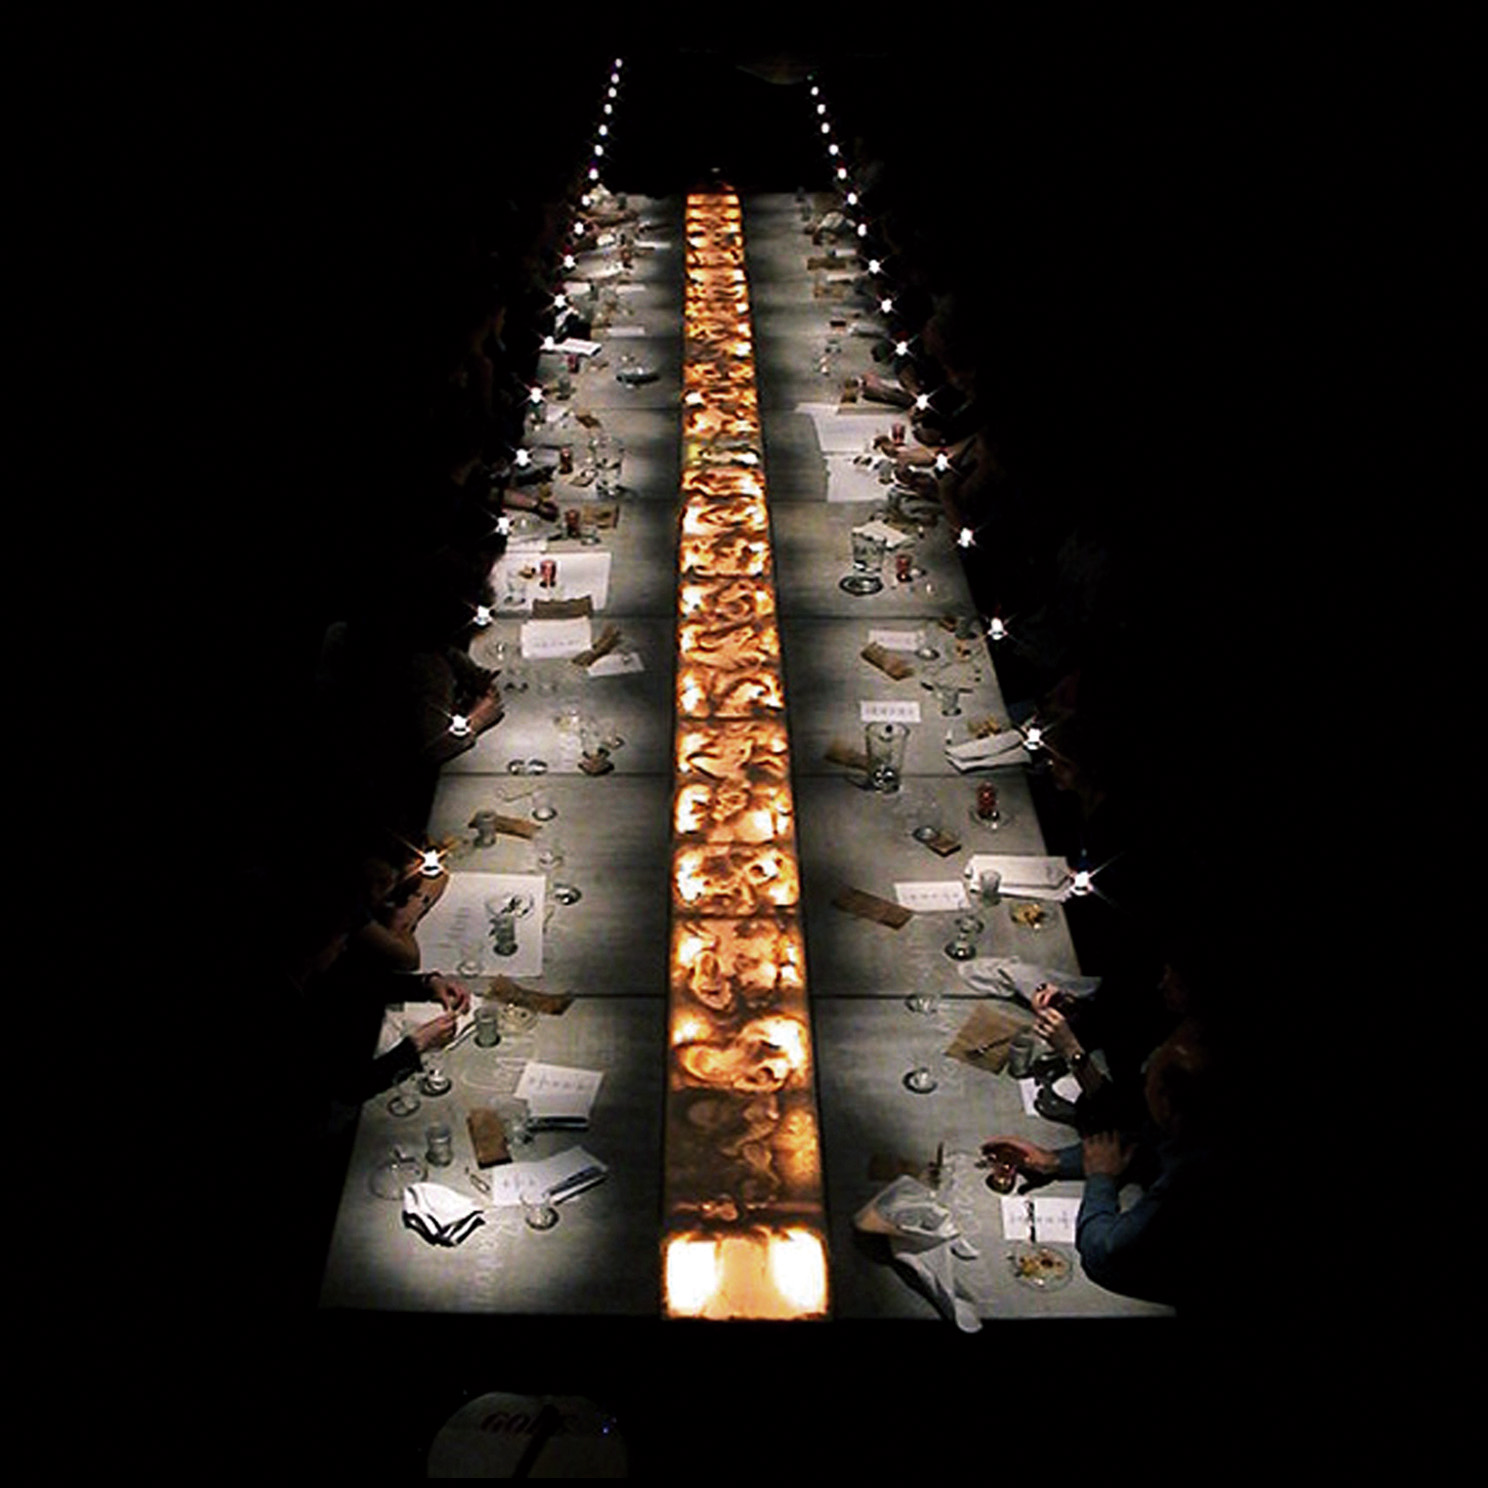 An aerial shot of a long table with place settings lit centrally, with diners in the dark, can just see their hands